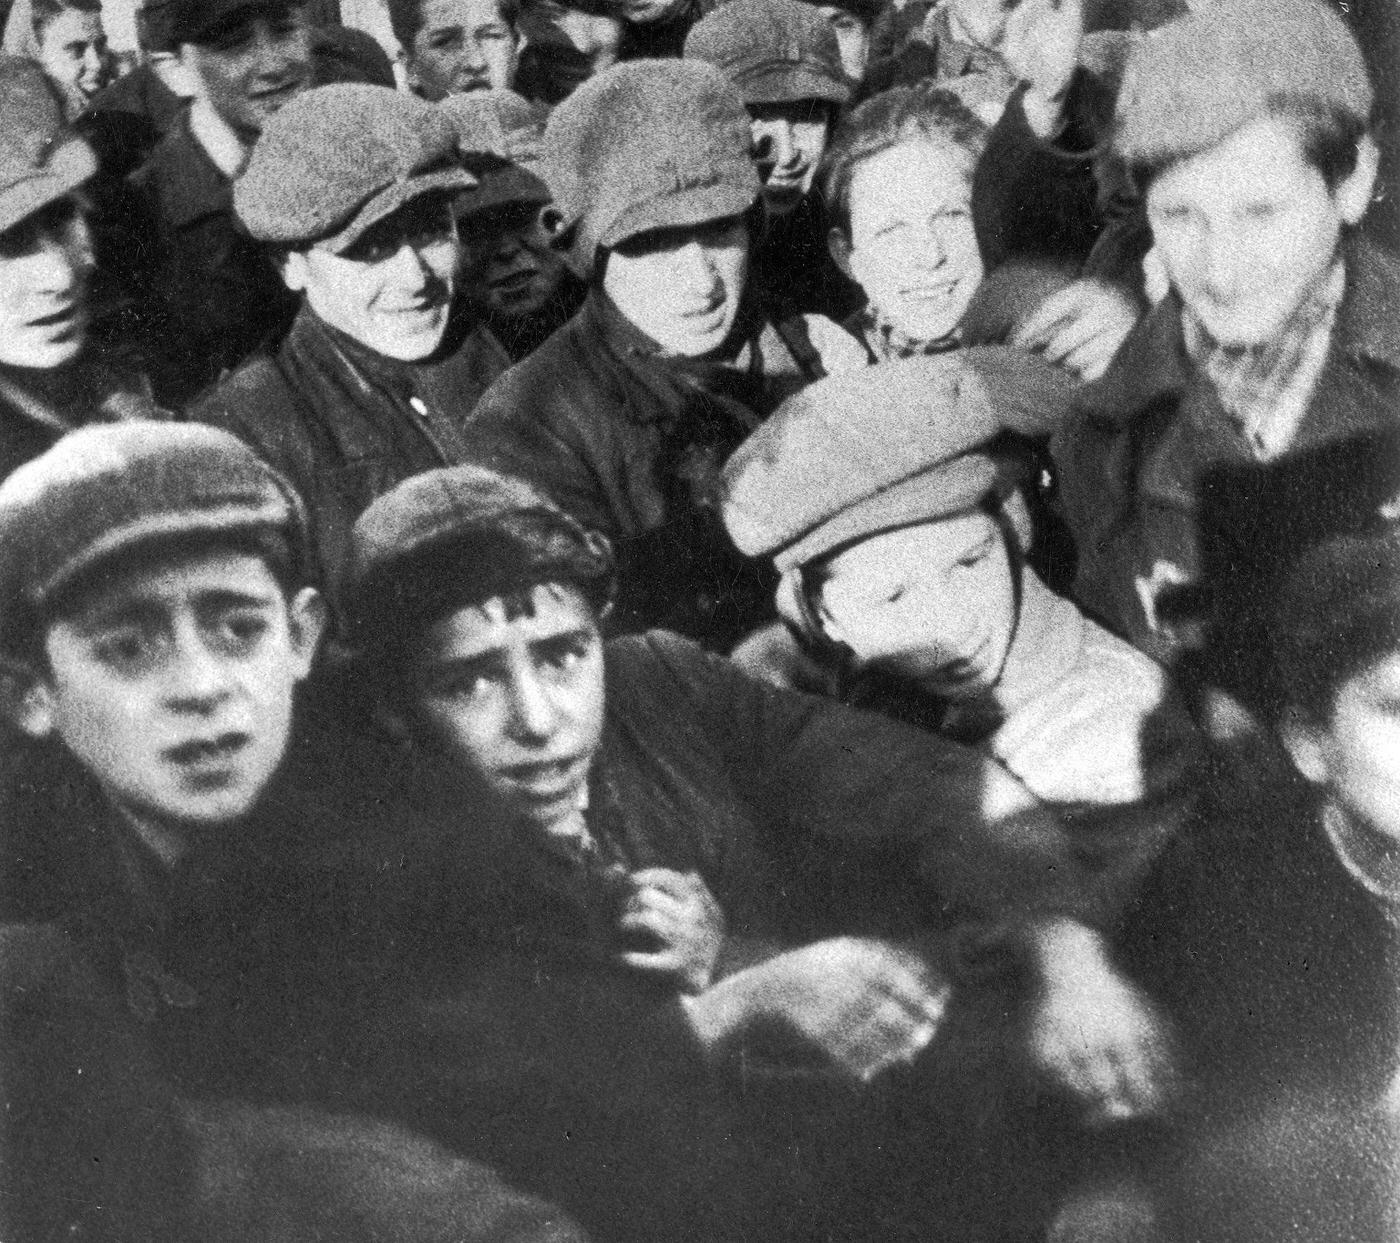 Children and young adults in the Warsaw Ghetto, 1940